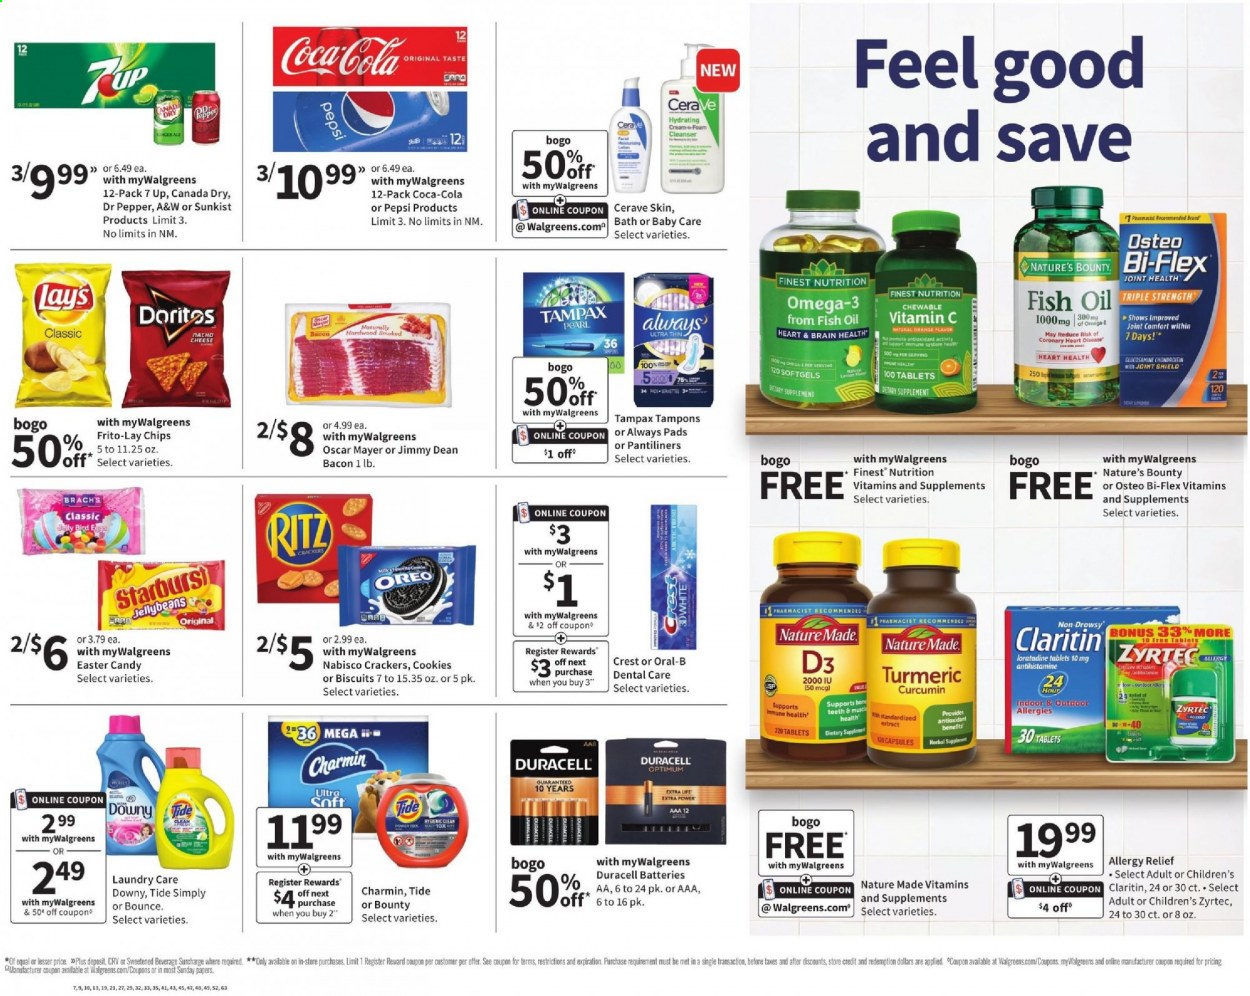 thumbnail - Walgreens Flyer - 03/07/2021 - 03/13/2021 - Sales products - Jimmy Dean, bacon, Oscar Mayer, cheese, Oreo, cookies, Bounty, crackers, biscuit, RITZ, Doritos, chips, Lay’s, Frito-Lay, Canada Dry, Coca-Cola, Pepsi, Dr. Pepper, 7UP, A&W, Charmin, Tide, Bounce, Oral-B, Crest, Tampax, pantiliners, Always pads, tampons, CeraVe, cleanser, battery, Duracell, Optimum, glucosamine, Nature Made, Nature's Bounty, vitamin c, Zyrtec, Omega-3, Osteo bi-flex, Bi-Flex, vitamin D3, allergy relief, 7 Days. Page 2.